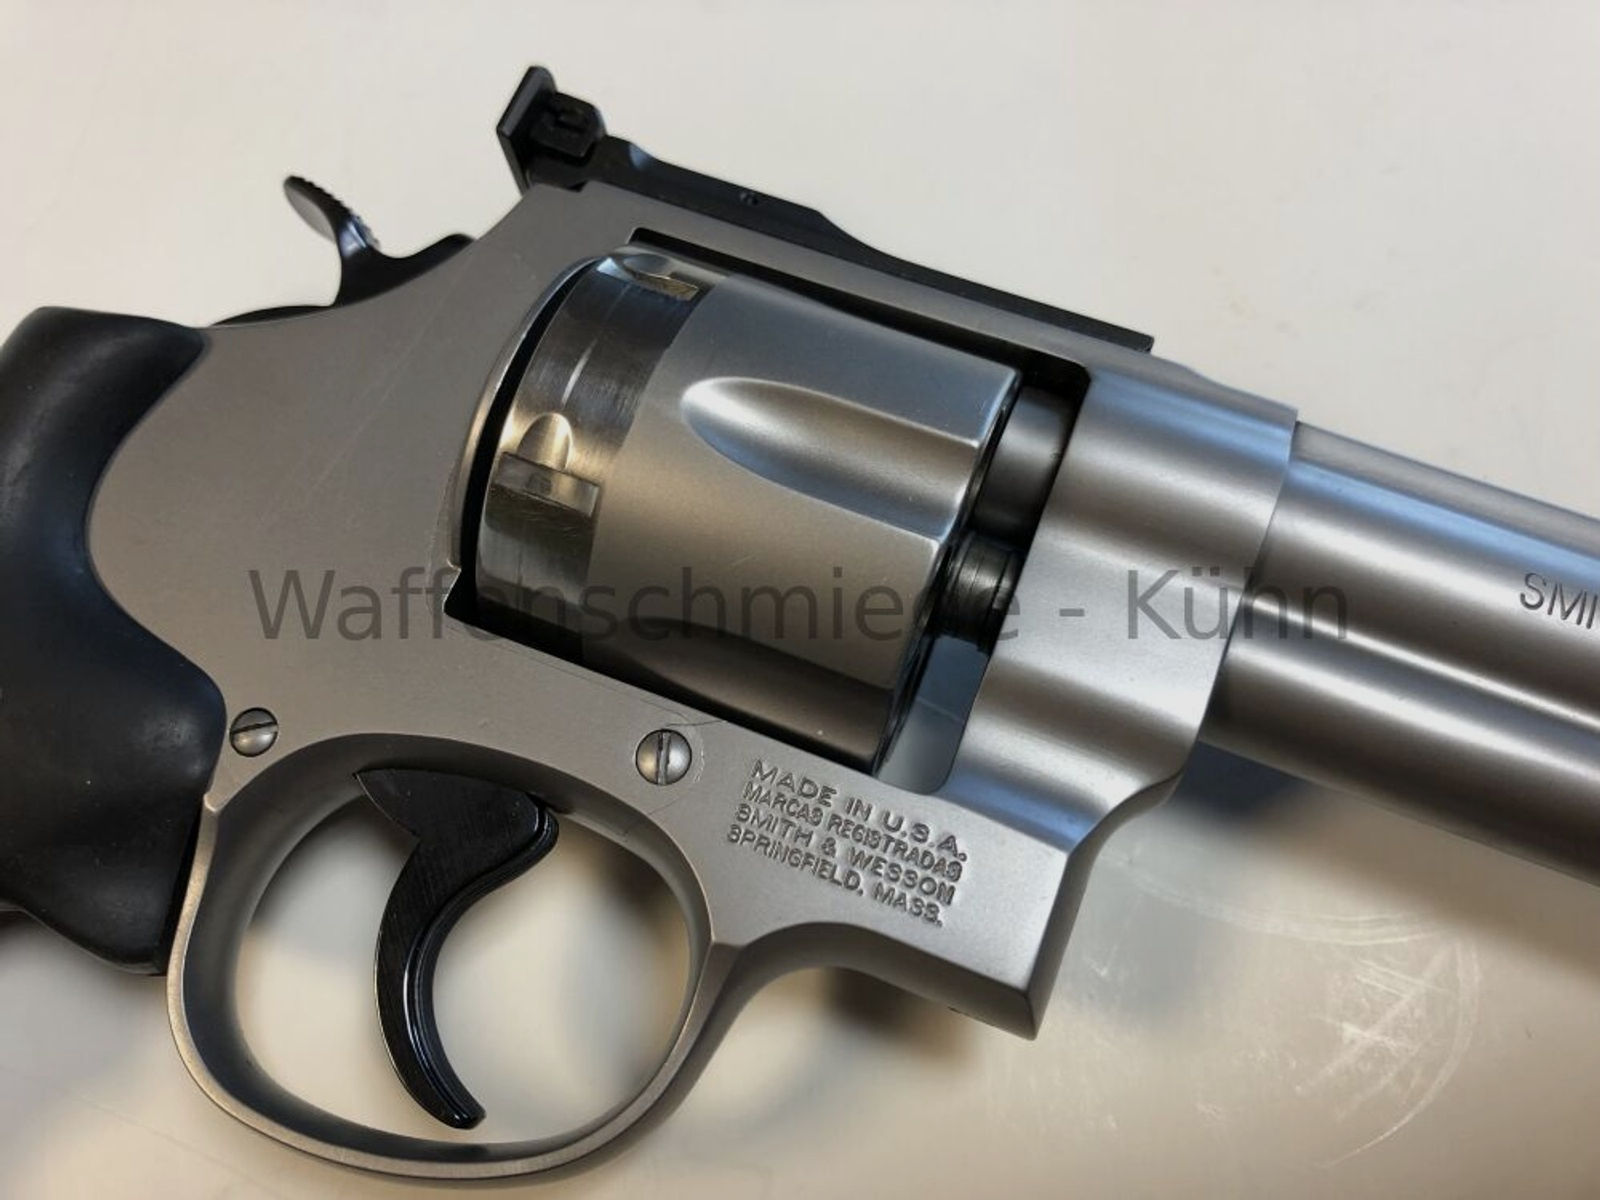 Smith & Wesson	 625-8